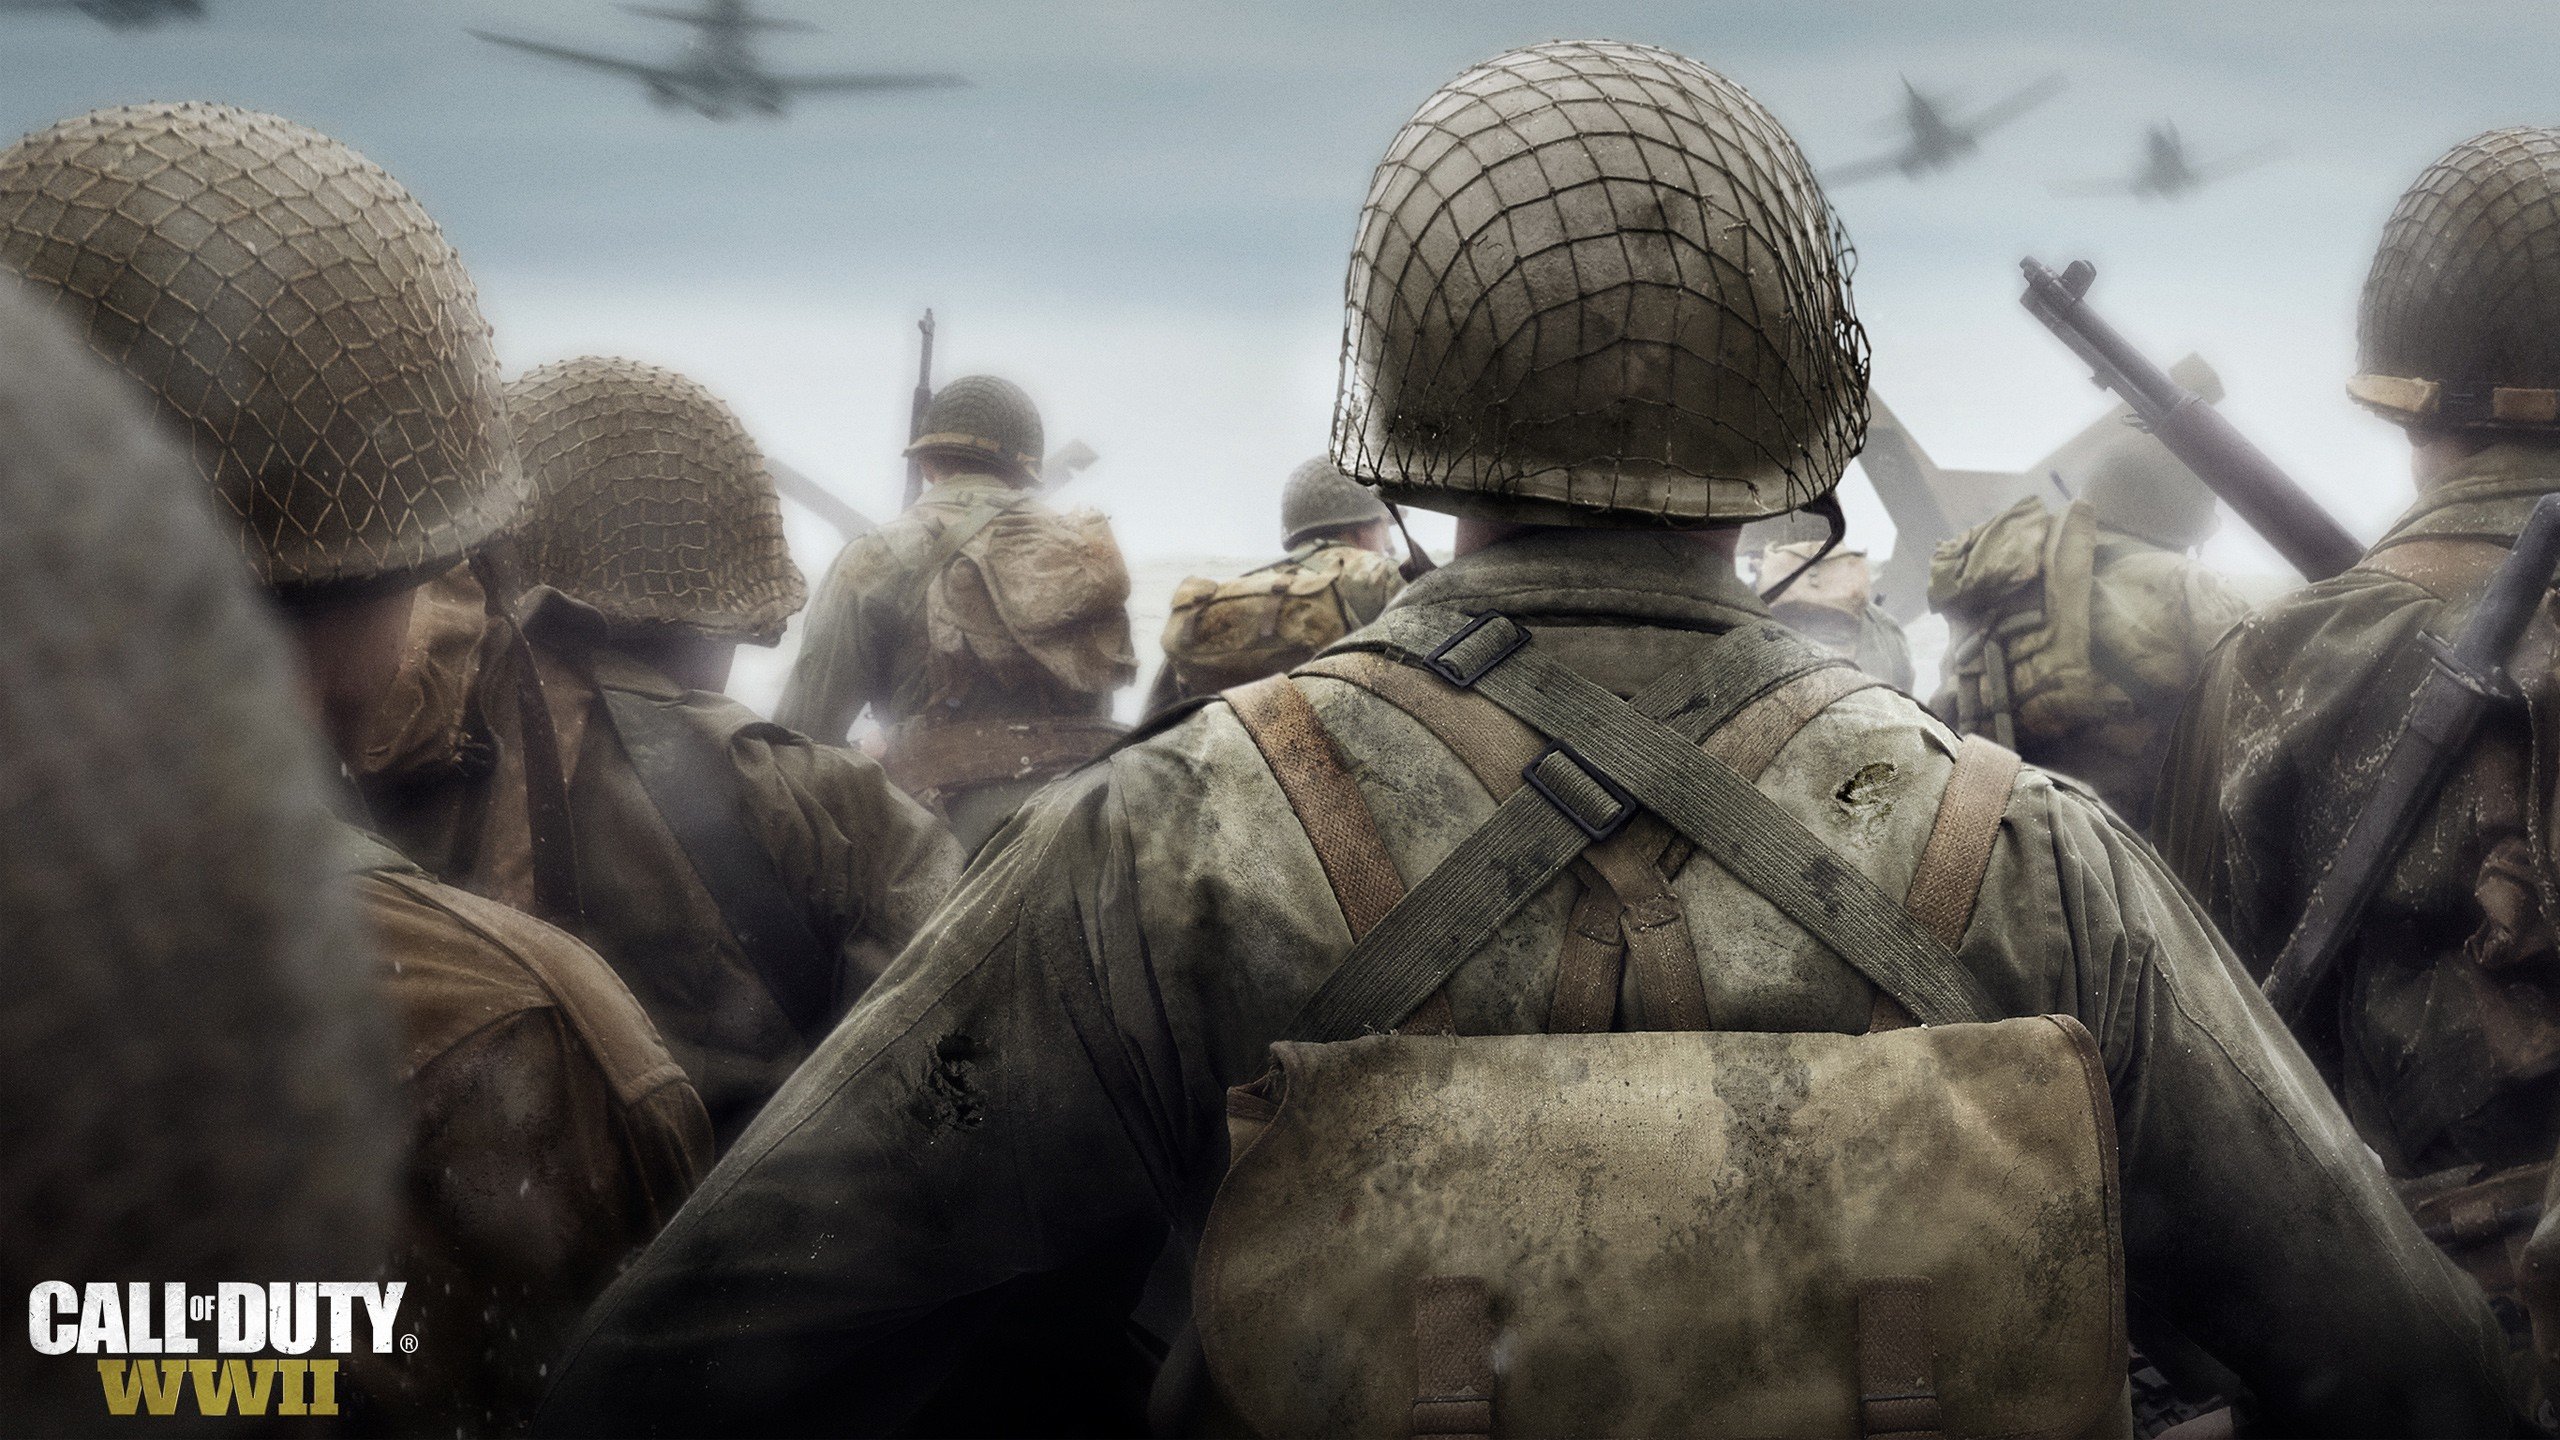 gamers, Call of Duty: WWII Wallpaper